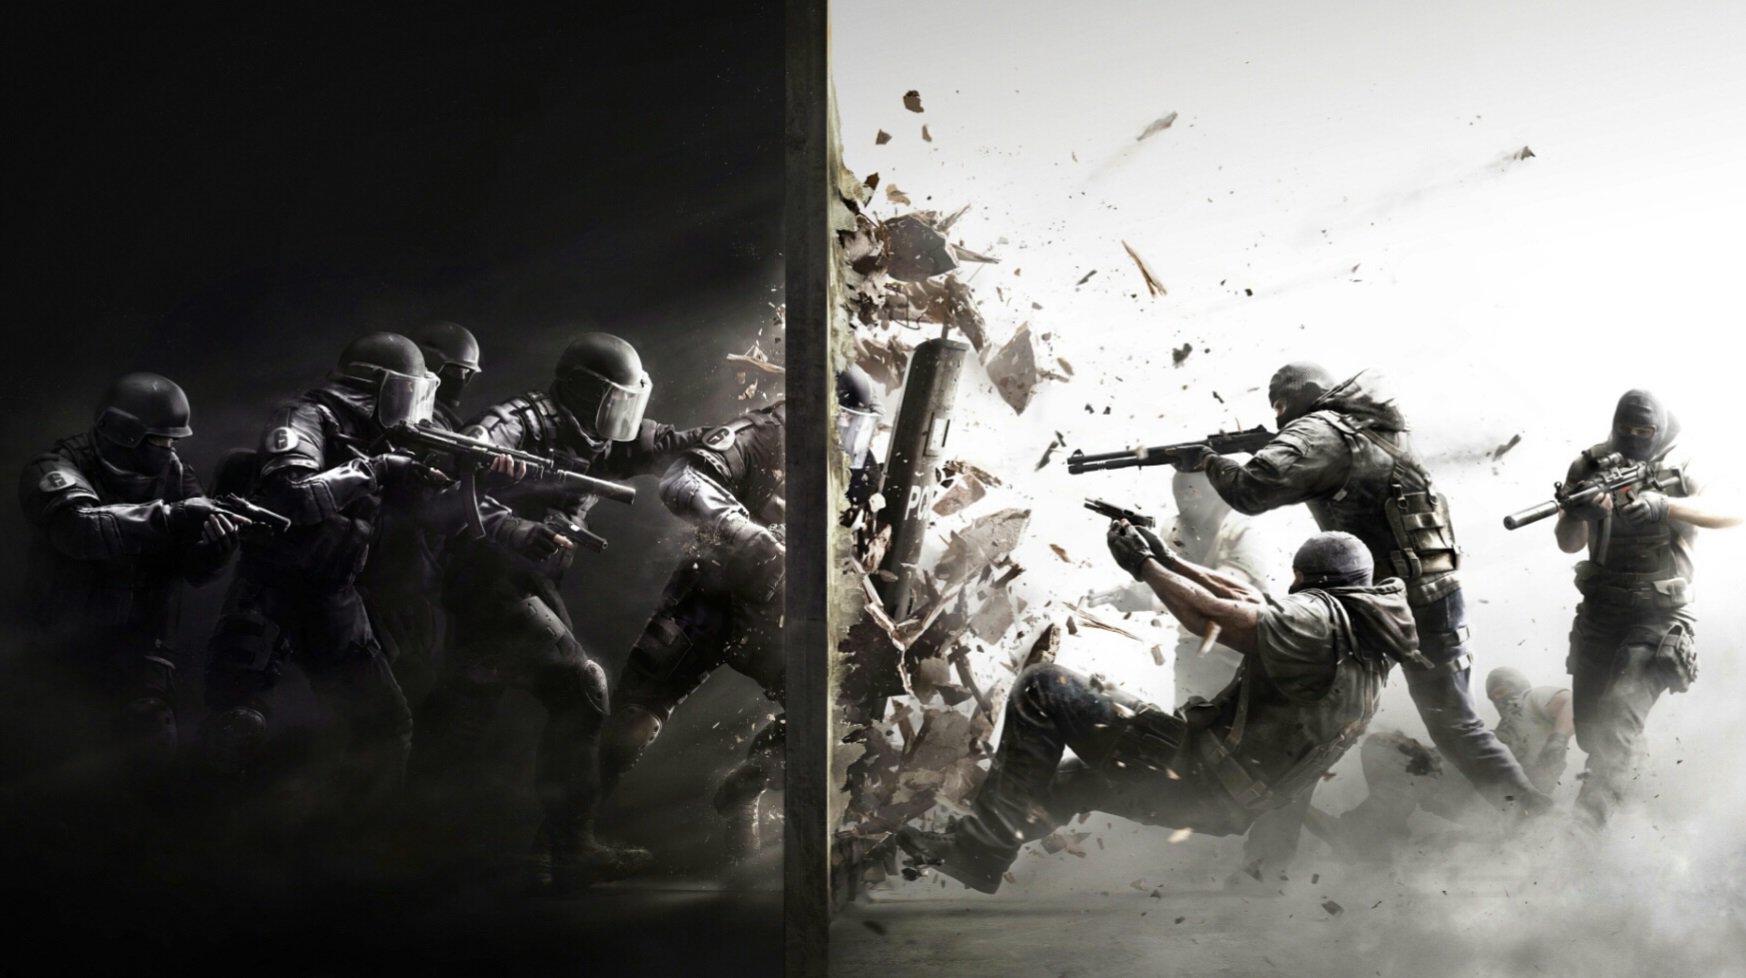 “Rainbow Six Siege” Won’t Have Single-Player Campaign - Single-Player Will Only Be Training